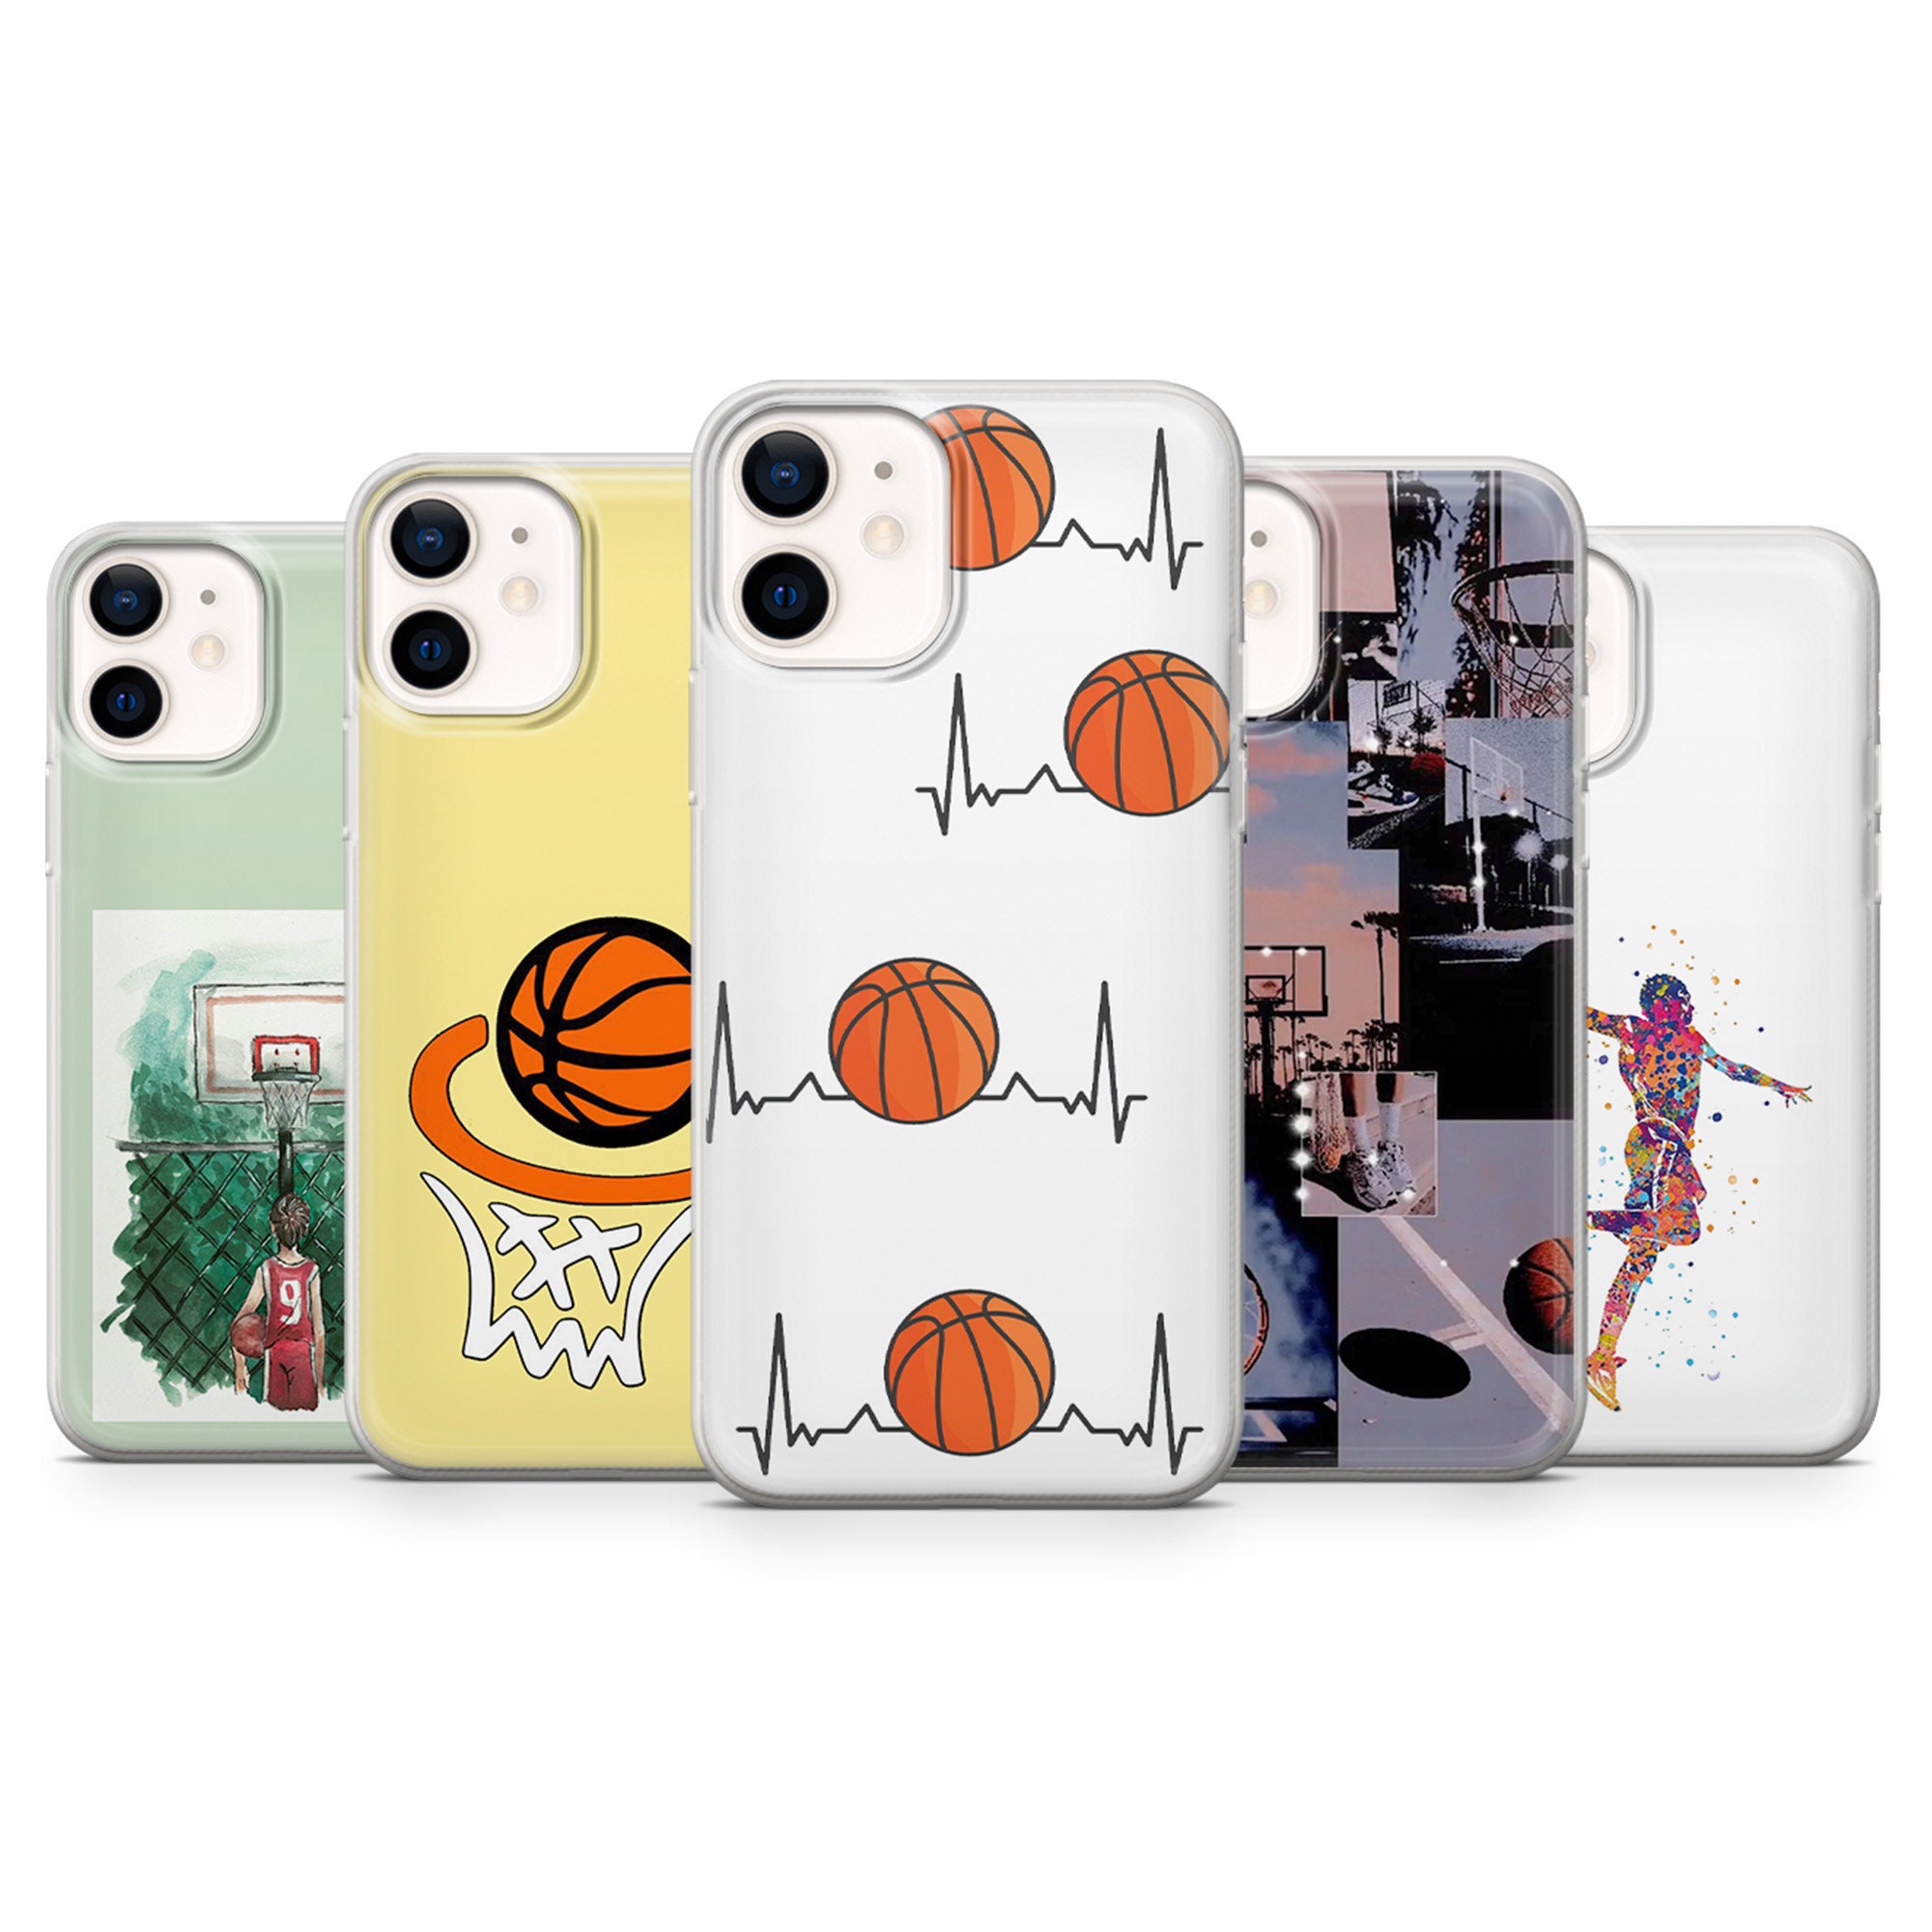 Iphone 6 Nba Cases - Etsy